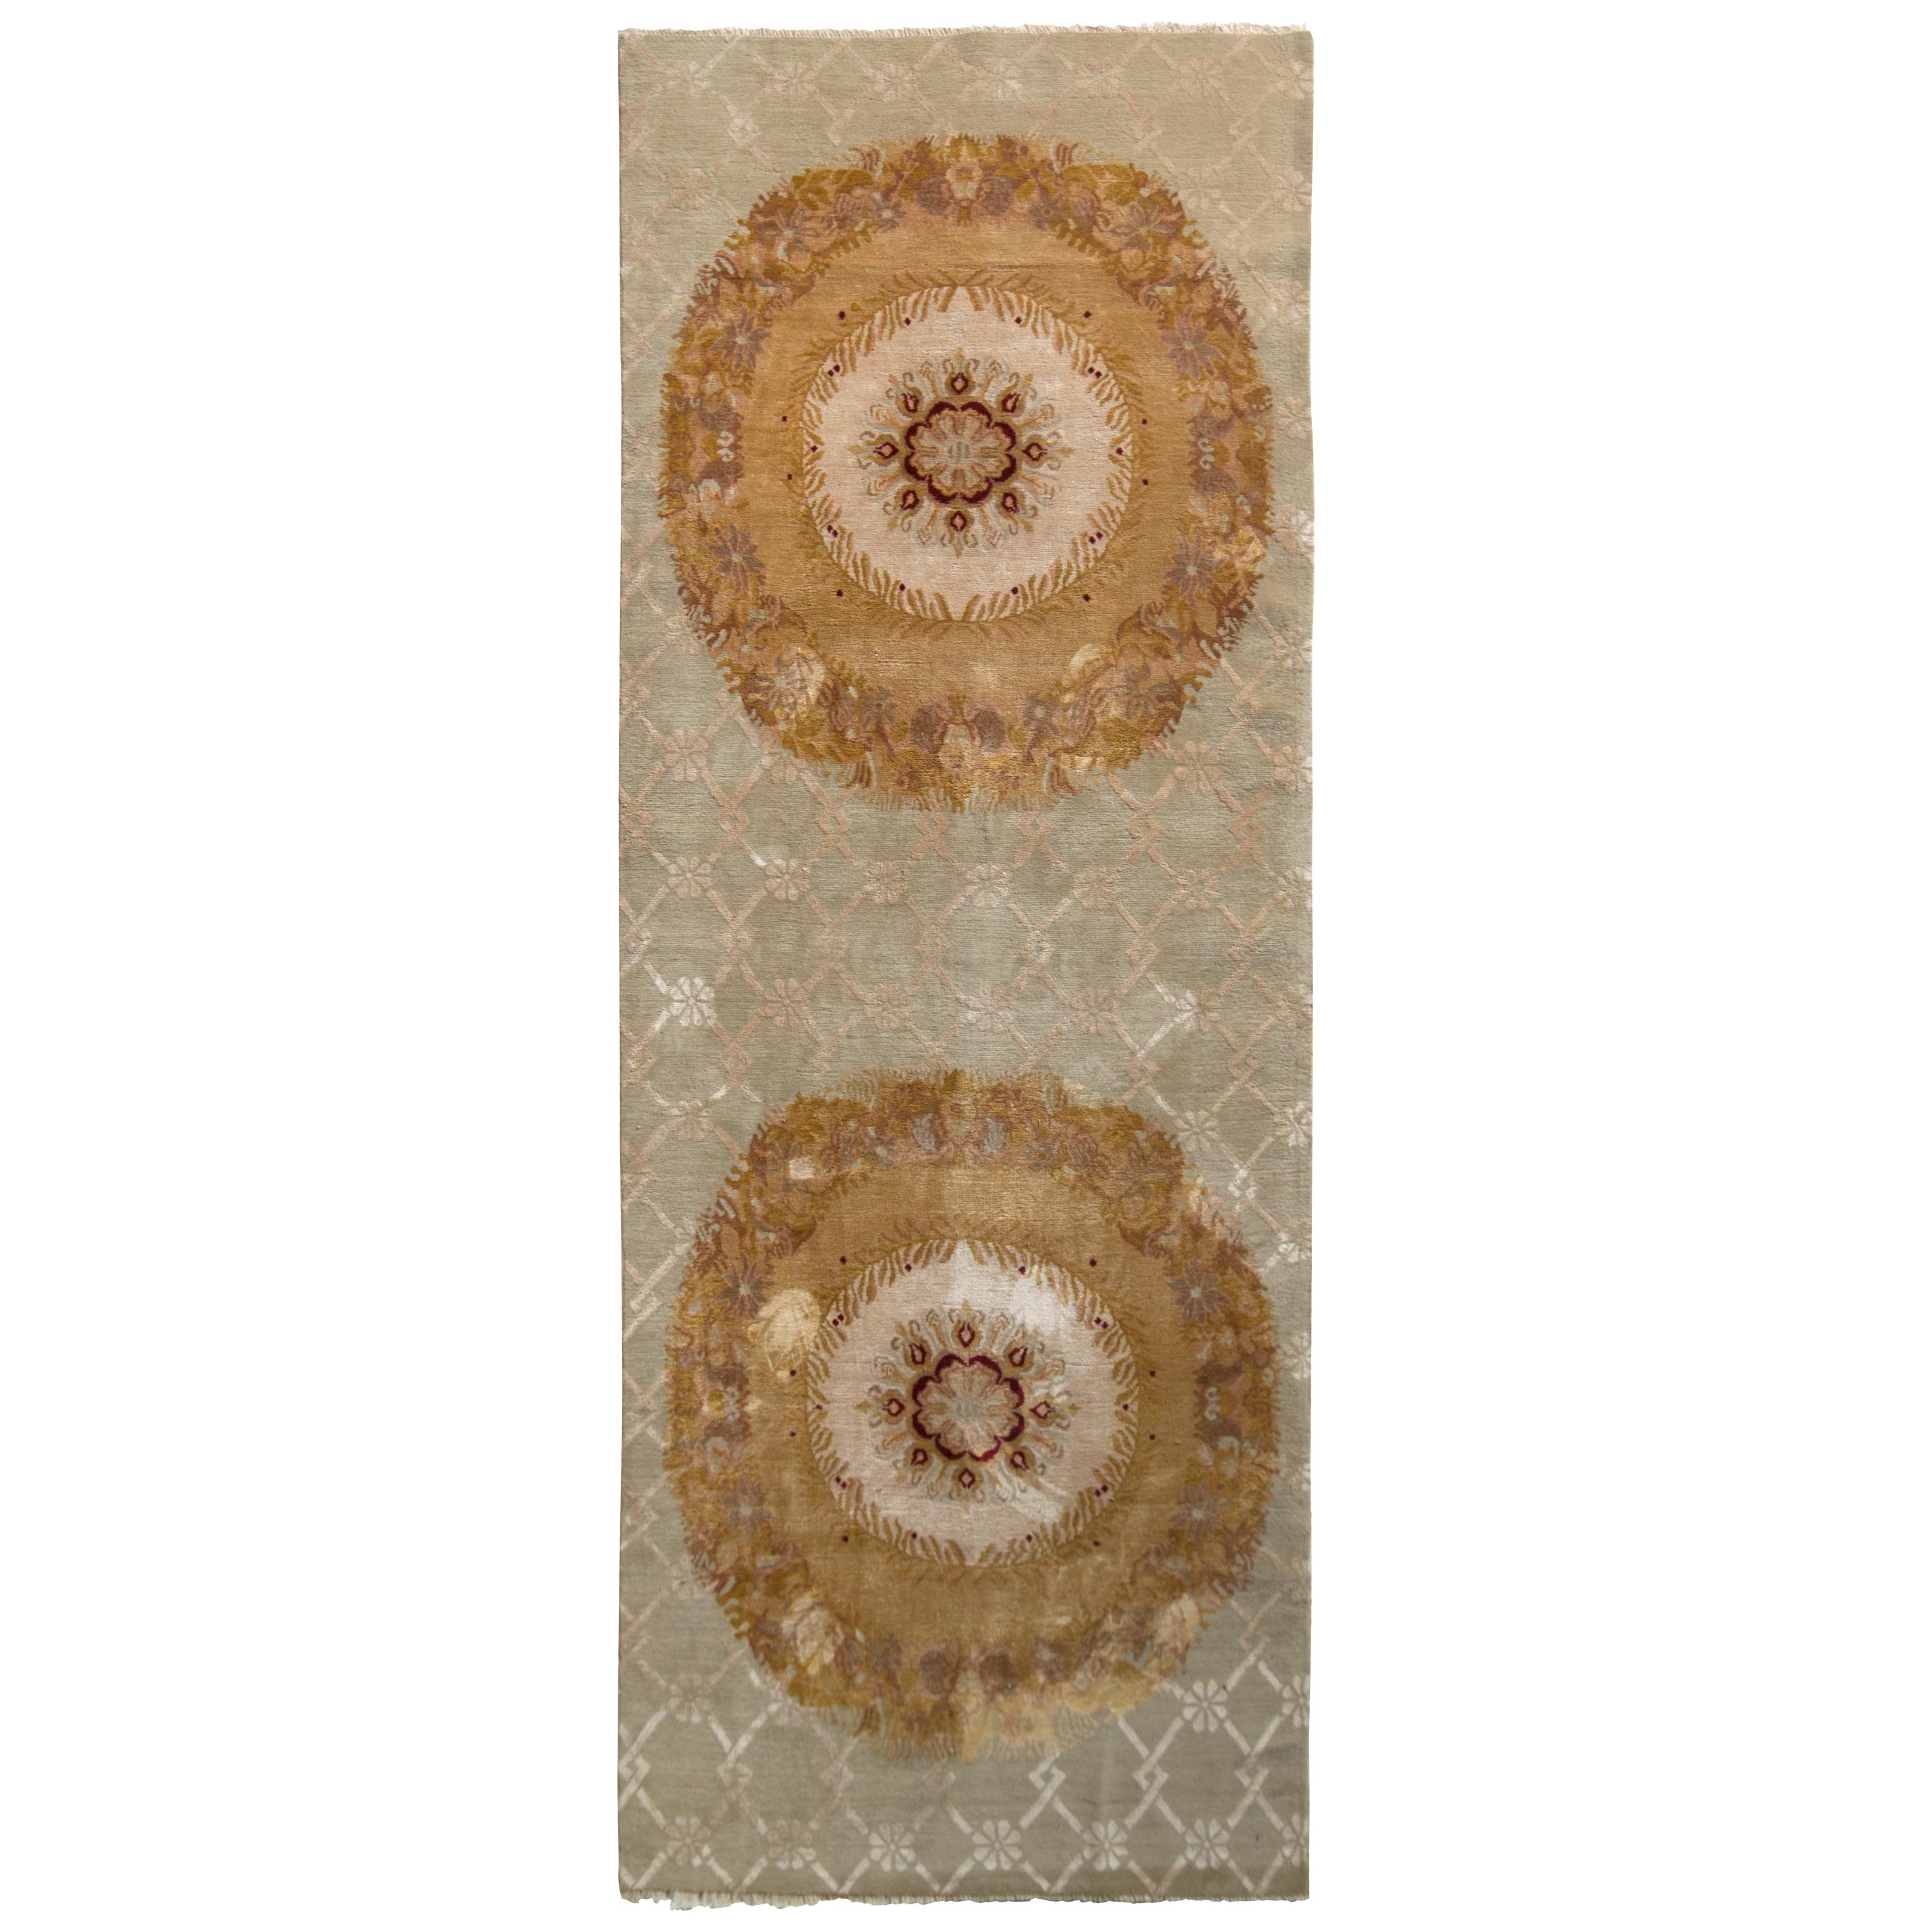 Rug & Kilim’s Aubusson Style Rug in Beige-Brown and Green Medallion Pattern For Sale